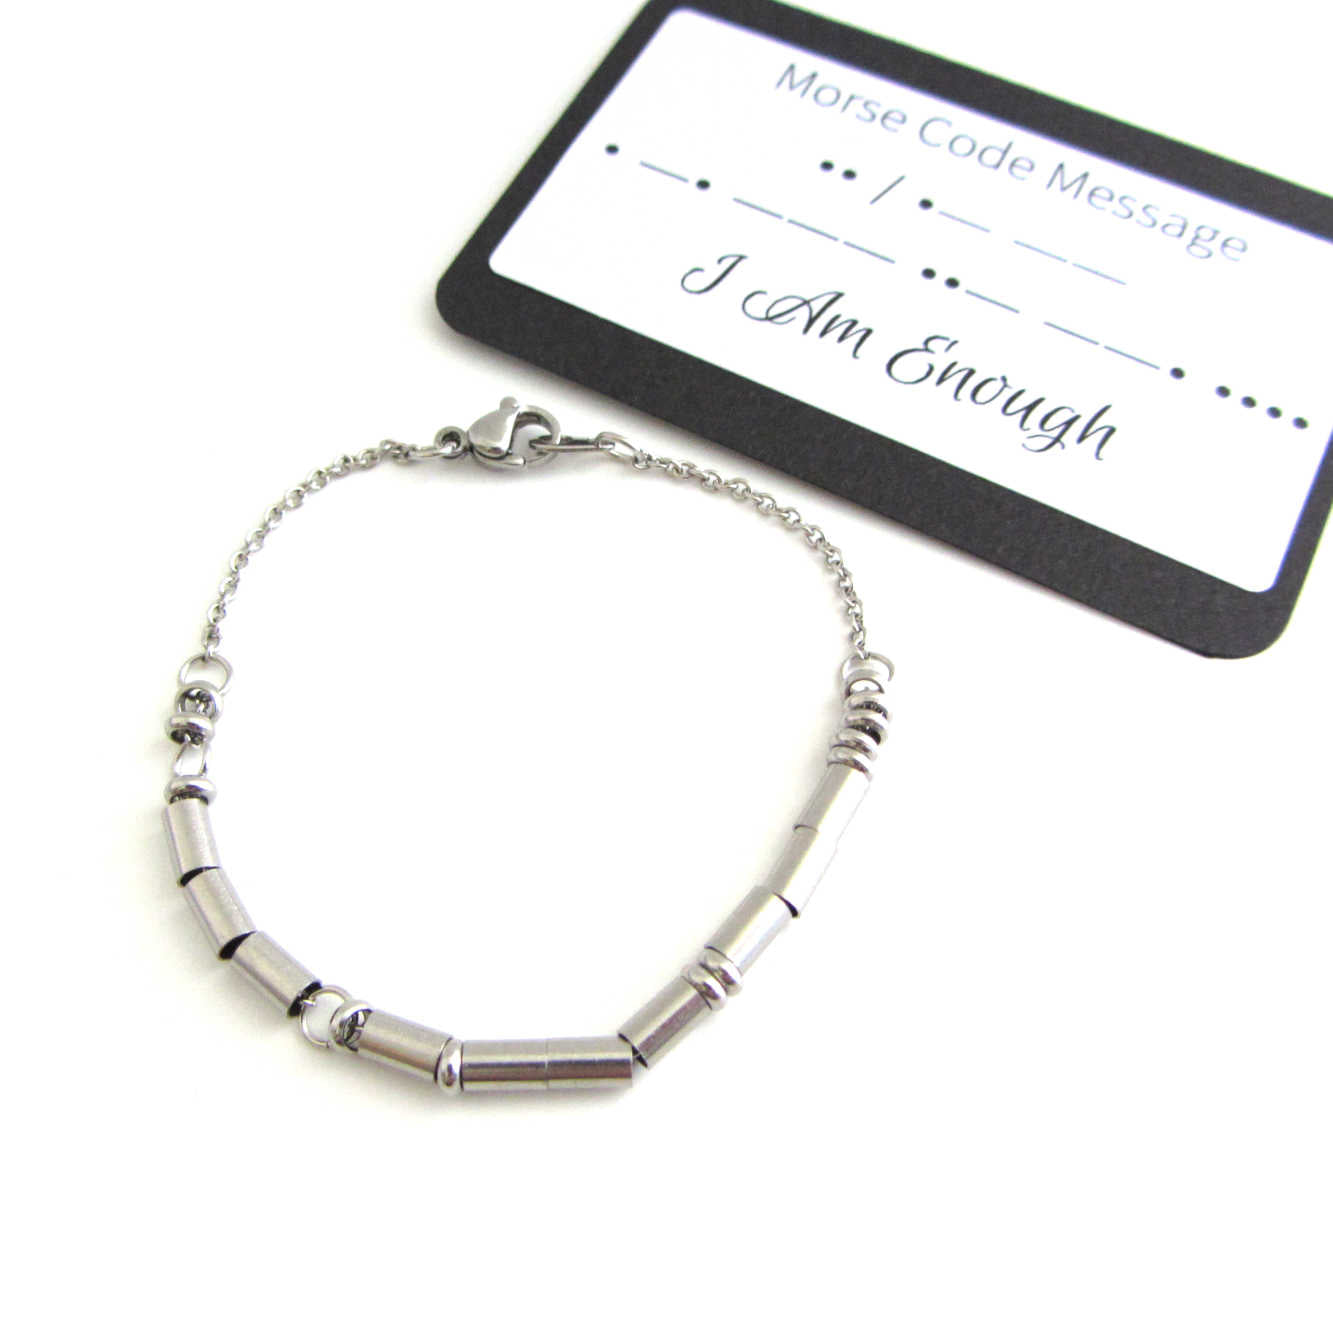 'I am enough' bracelet written in morse code stainless steel beads on a stainless steel chain with 'I Am Enough' morse code message card